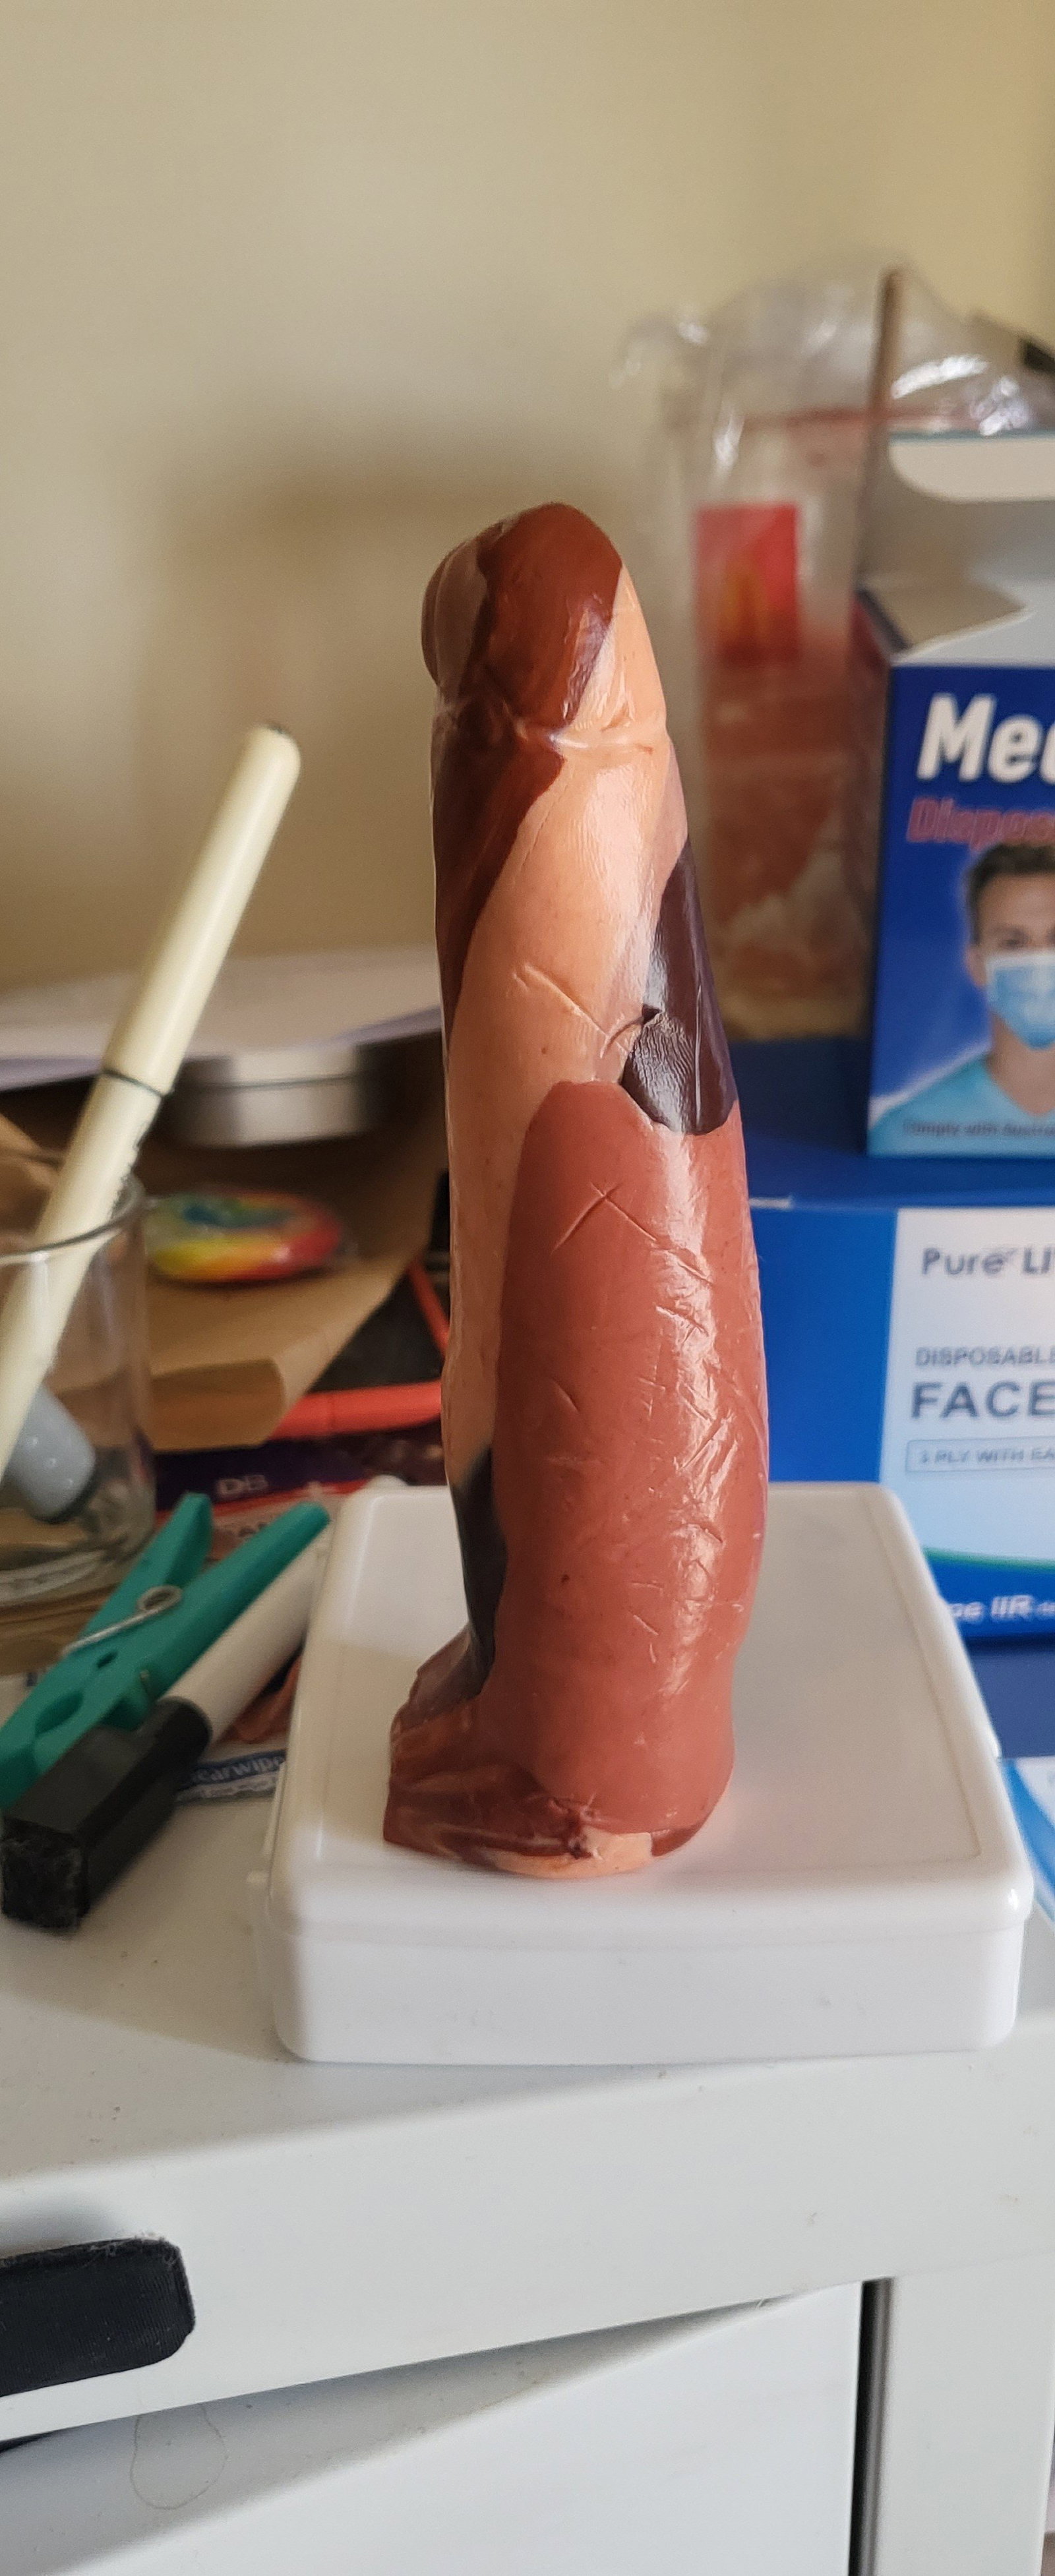 Watch the Photo by lovebimen with the username @lovebimen, posted on April 6, 2022. The post is about the topic Love bi men. and the text says 'hey everyone during the pandemic was bored bored so i decided to make my own dildo out of Polymer clay and i jave stopped and i am getting better at it each time 

i am from Melbourne Australia'